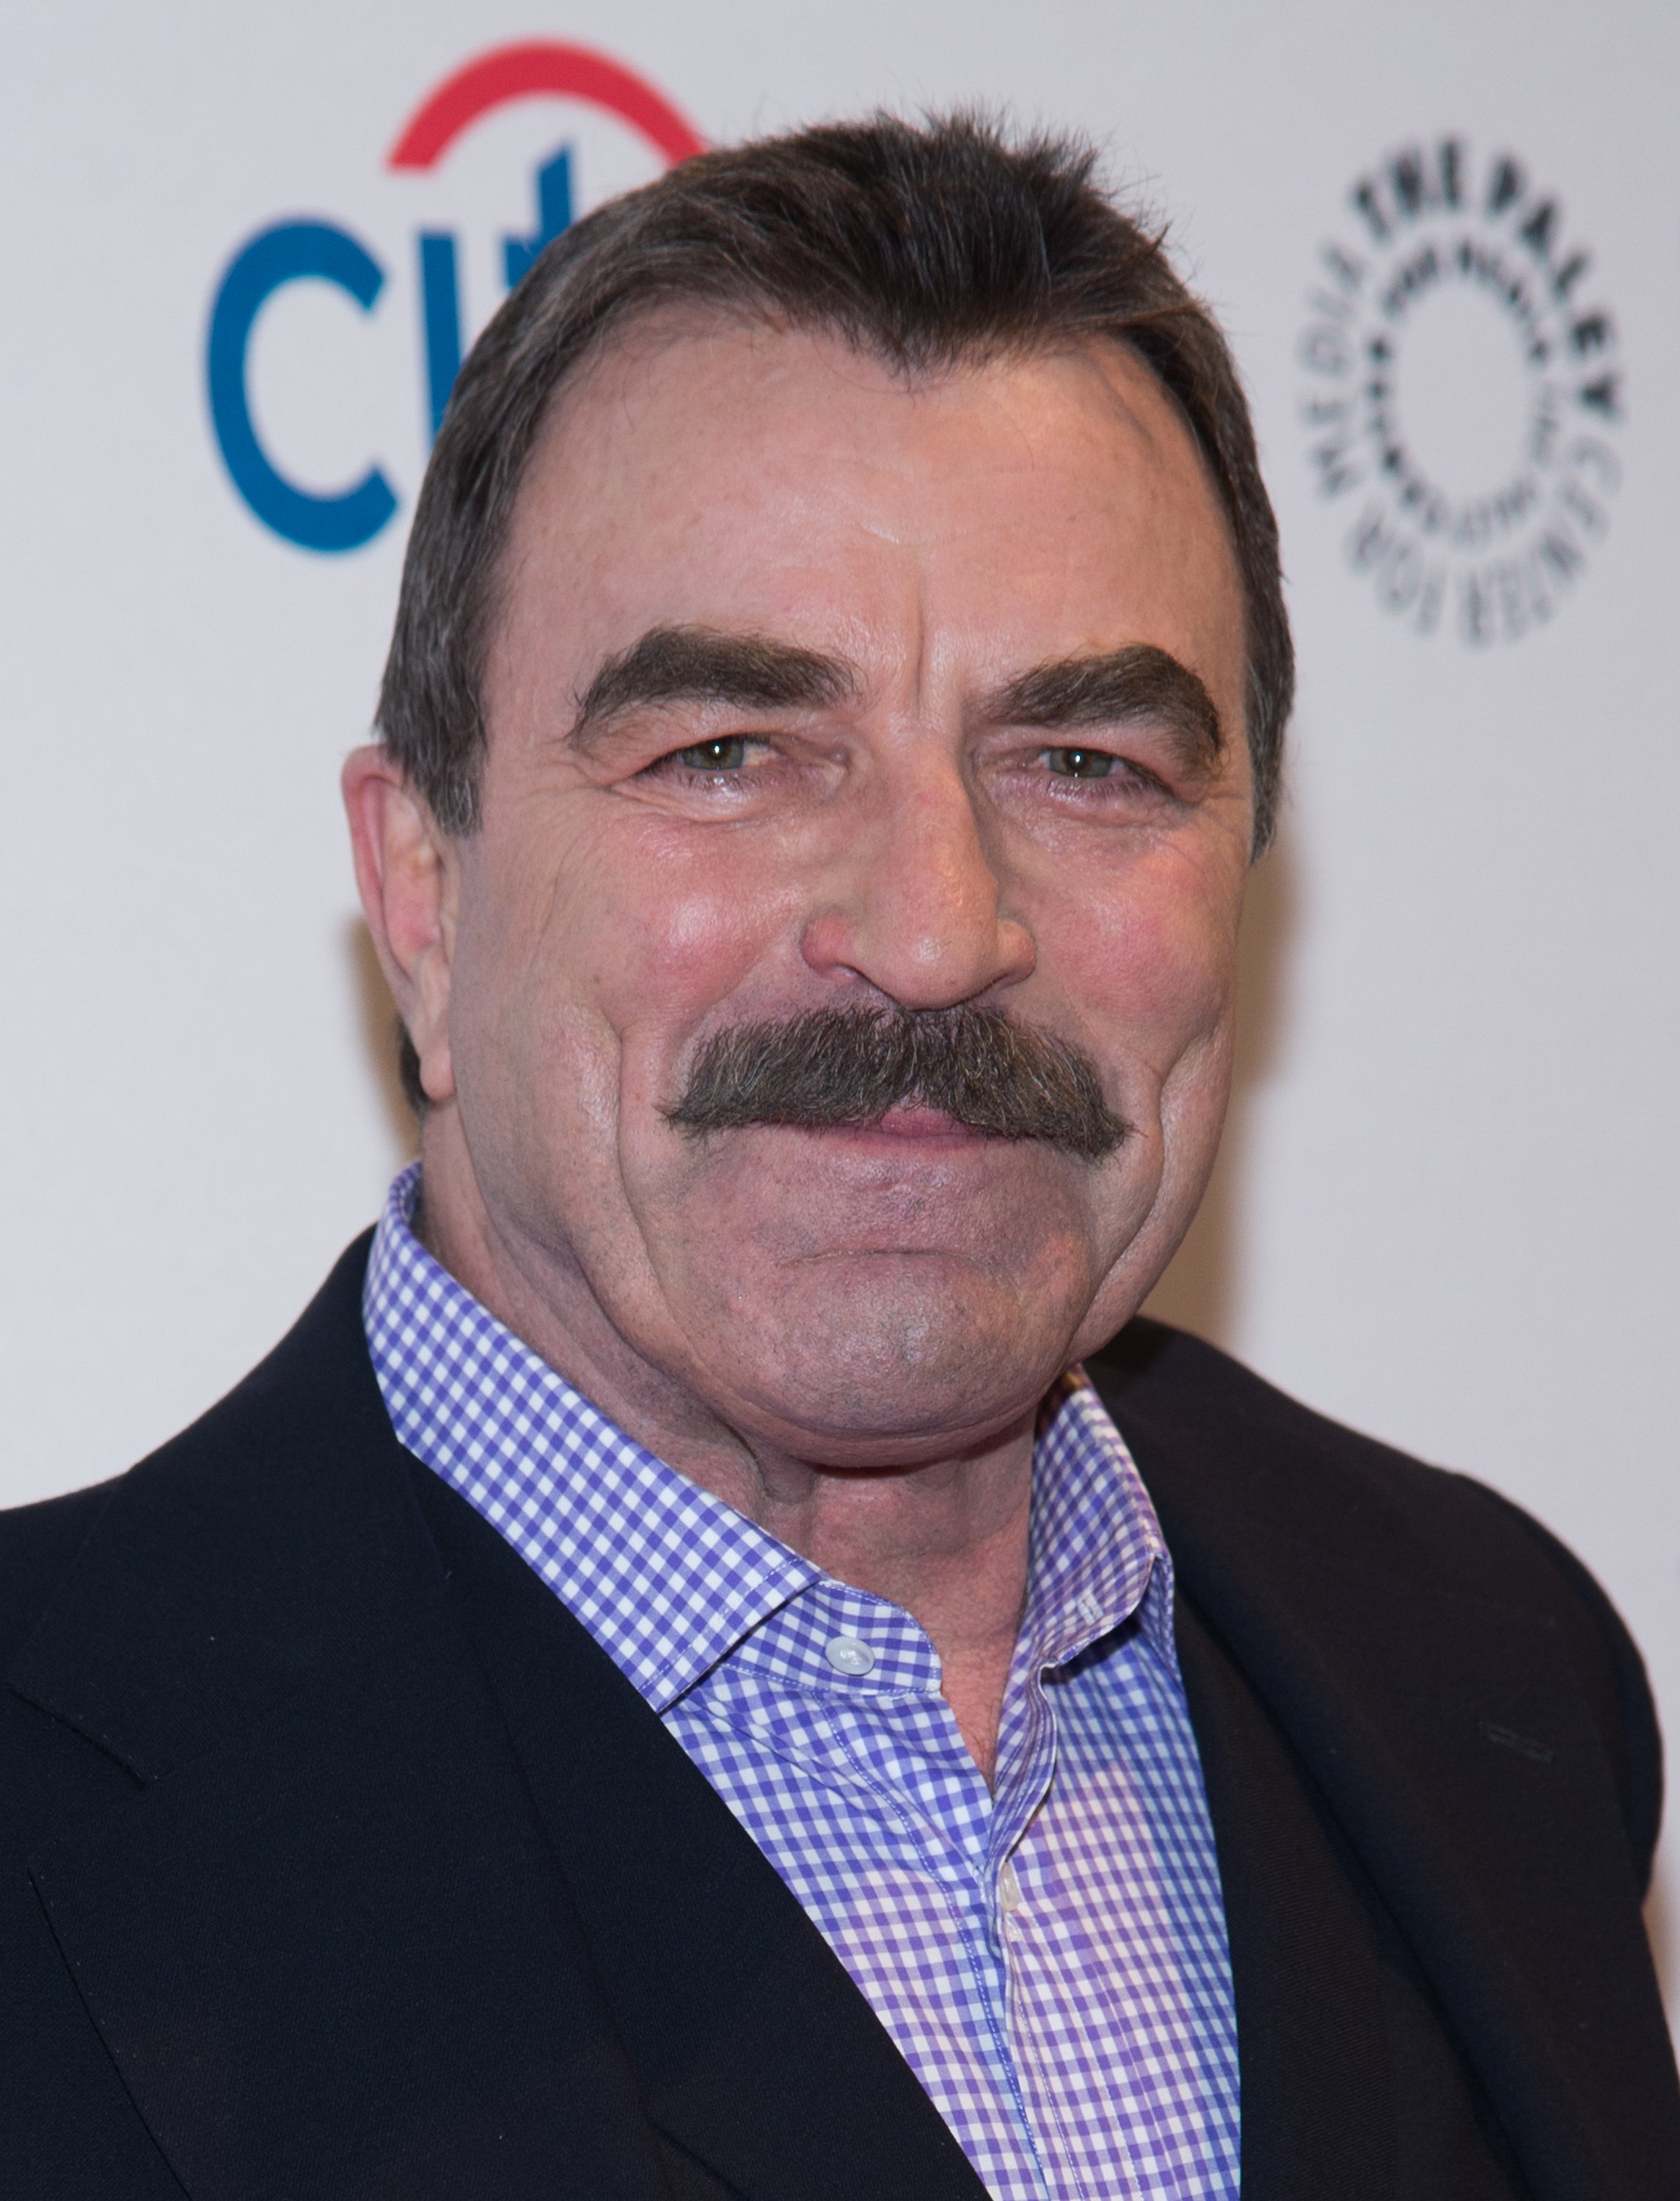 Tom Selleck attends the 2nd Annual Paleyfest of "Blue Bloods" in New York on October 18, 2014 | Photo: Getty Images